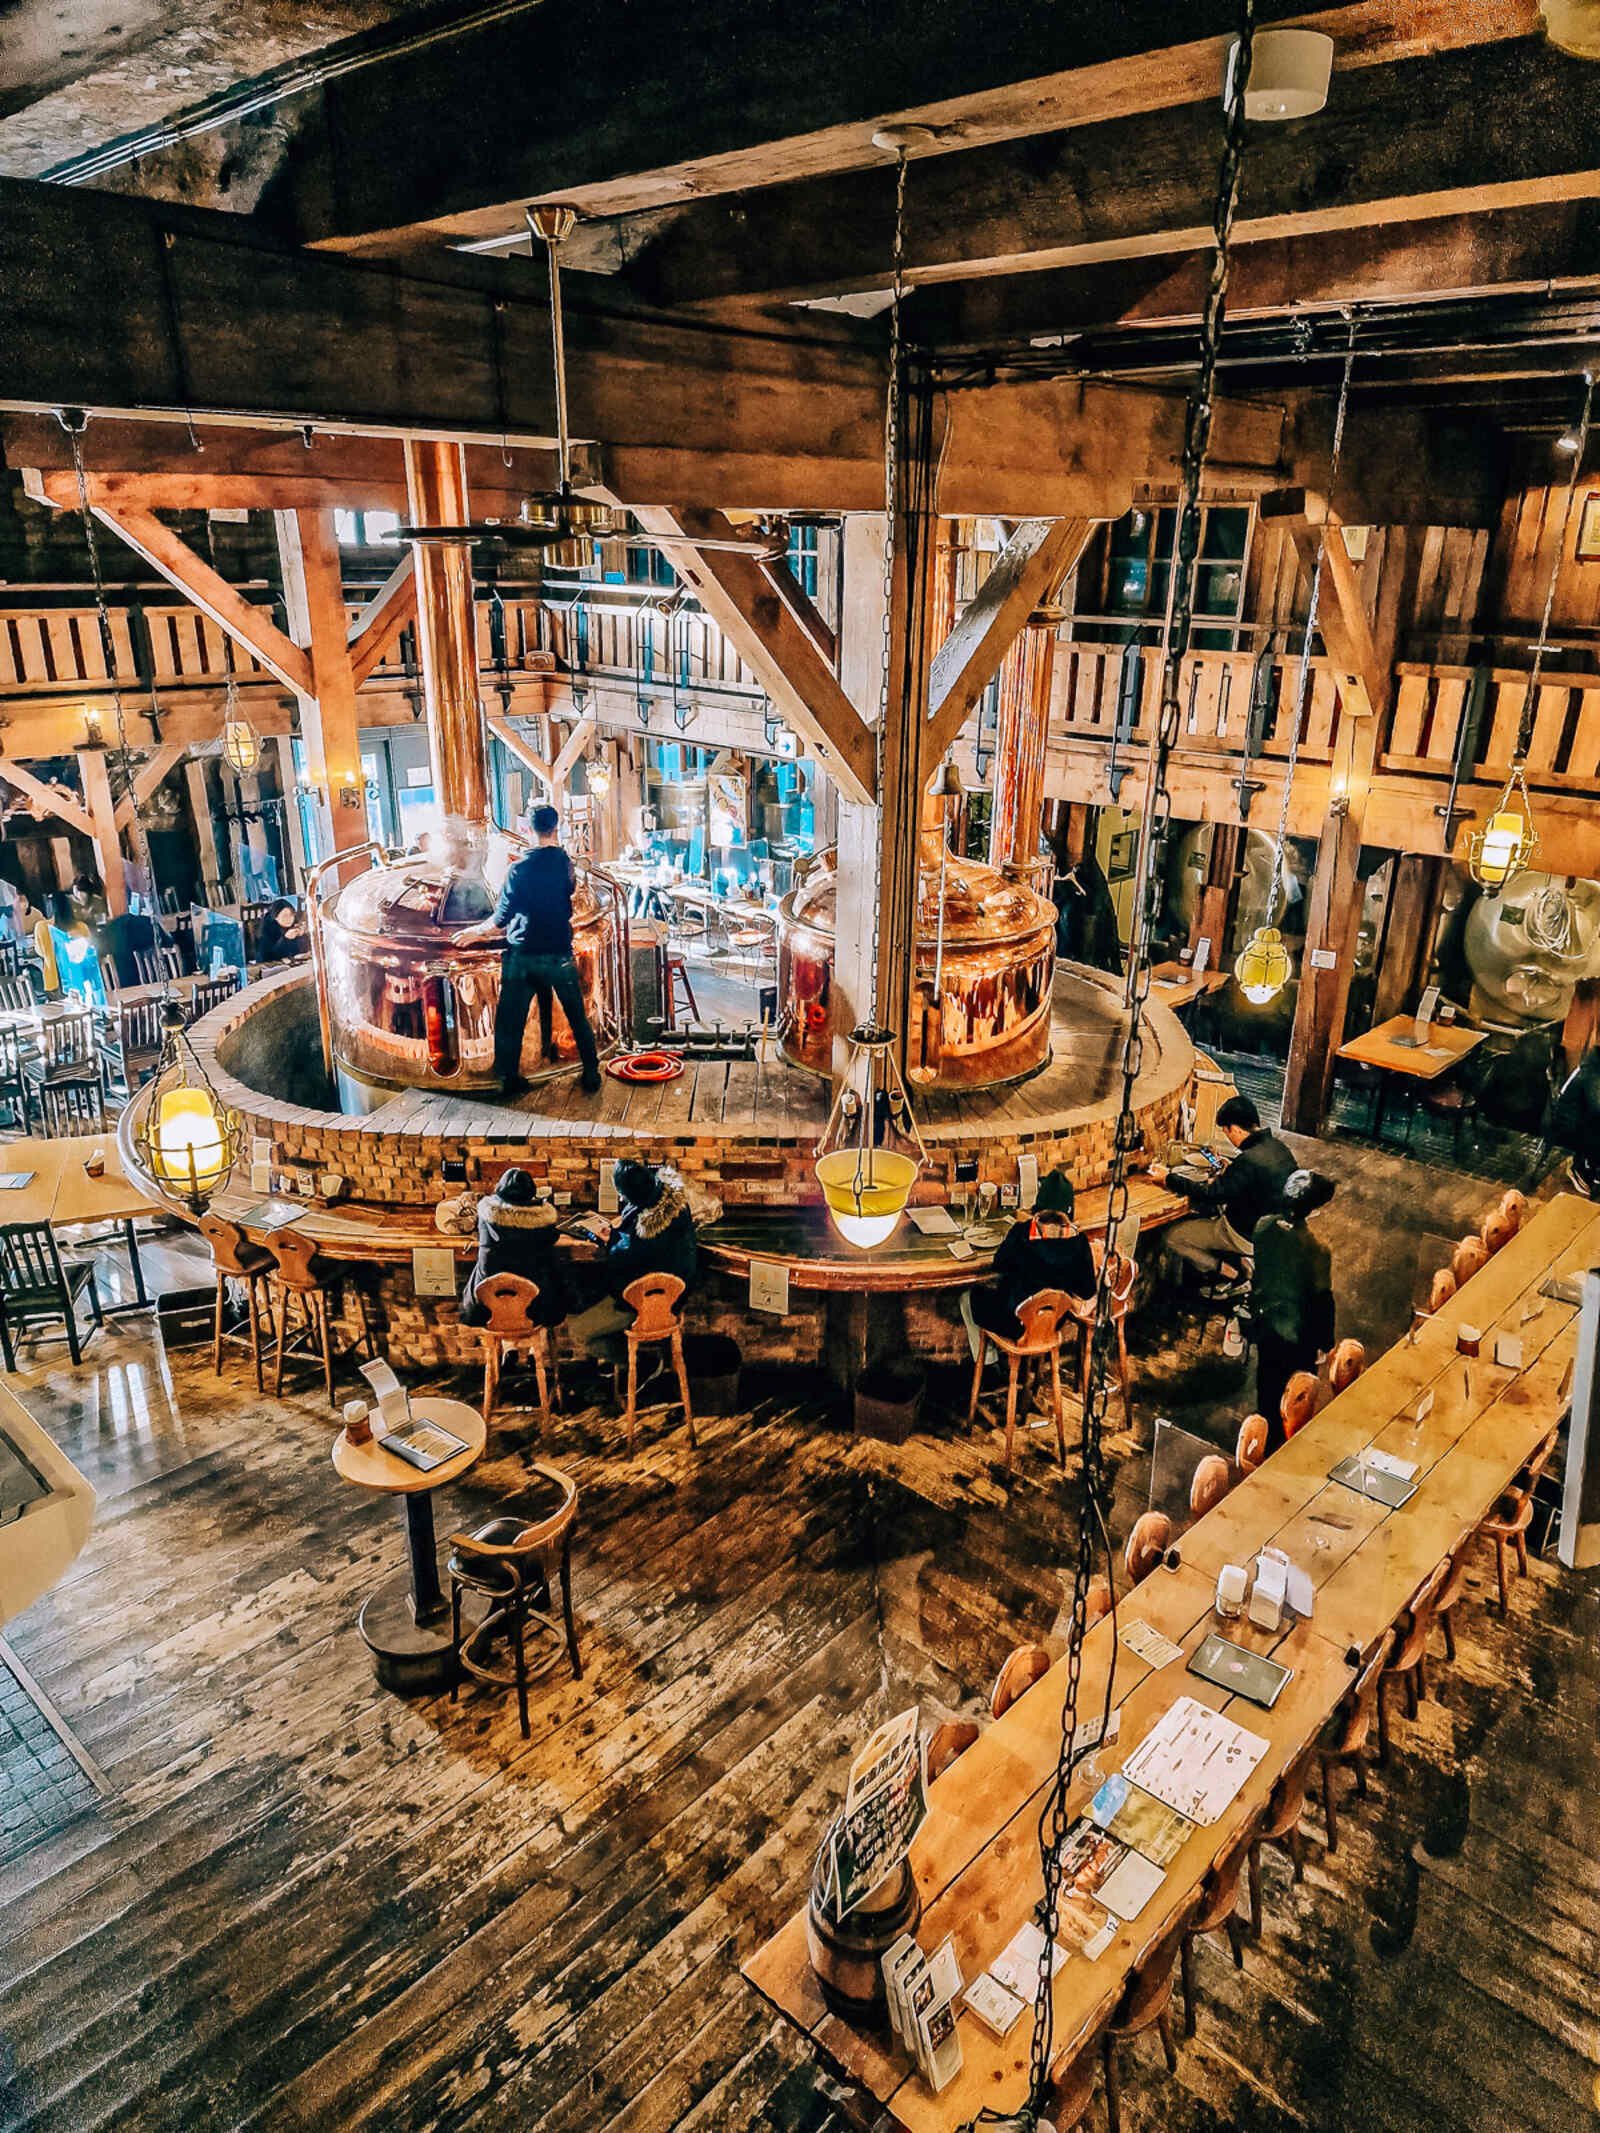 a large brewery room in a warehouse completely made of wood with seating tables and a copper beer fermentation tanks in the middle